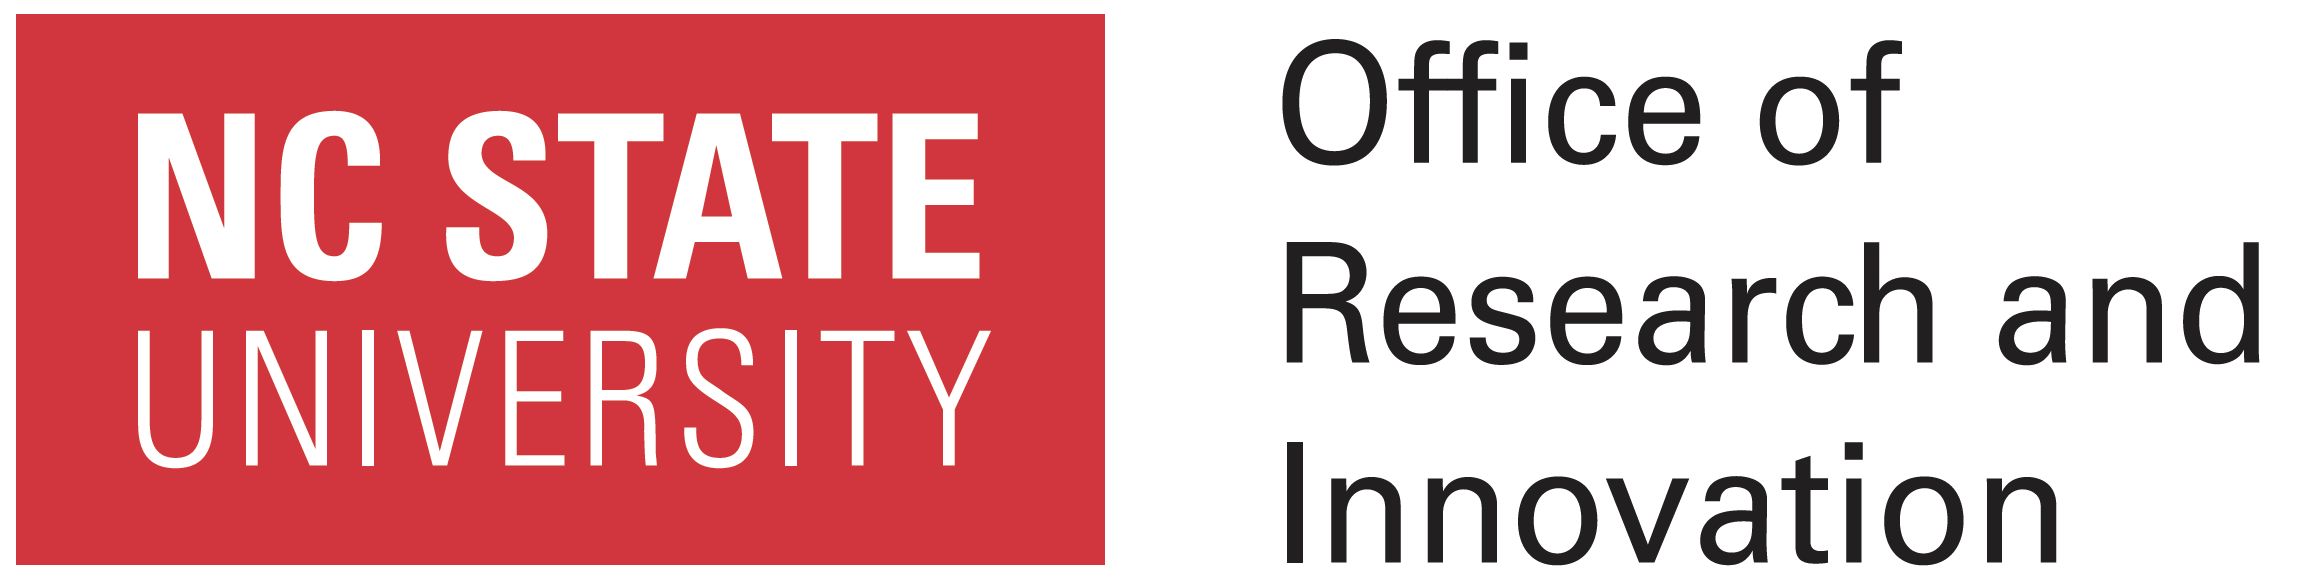 NCSU Office of Research and Innovation logo